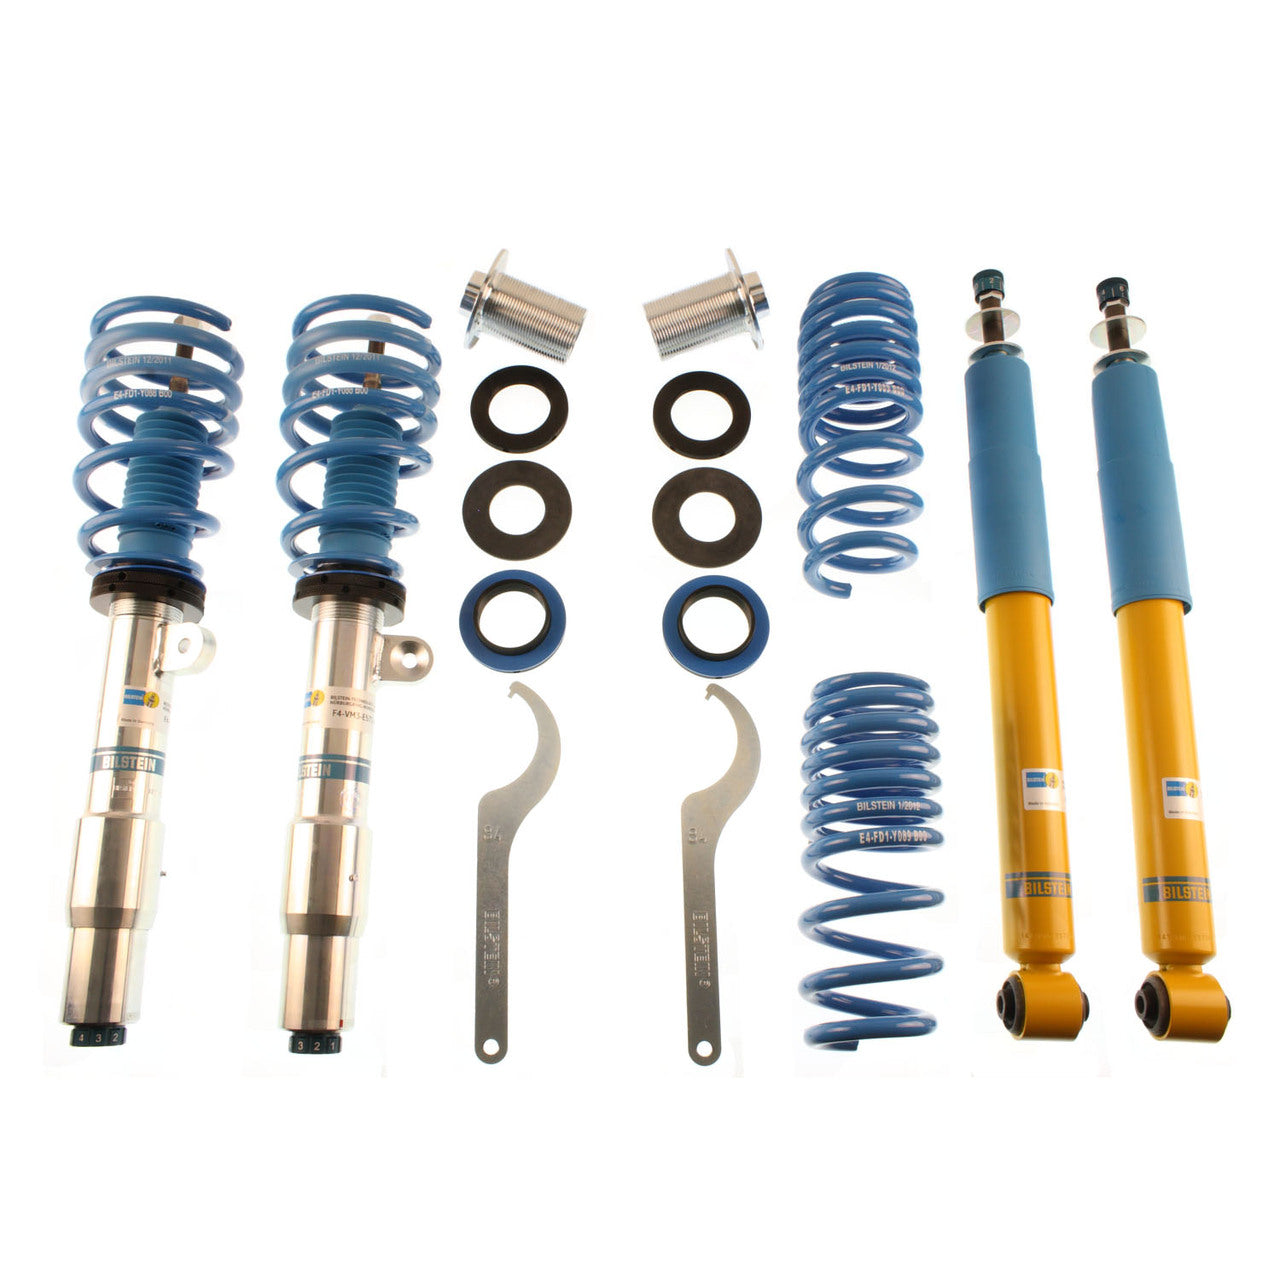  B16 PSS10 Coilover Kit 